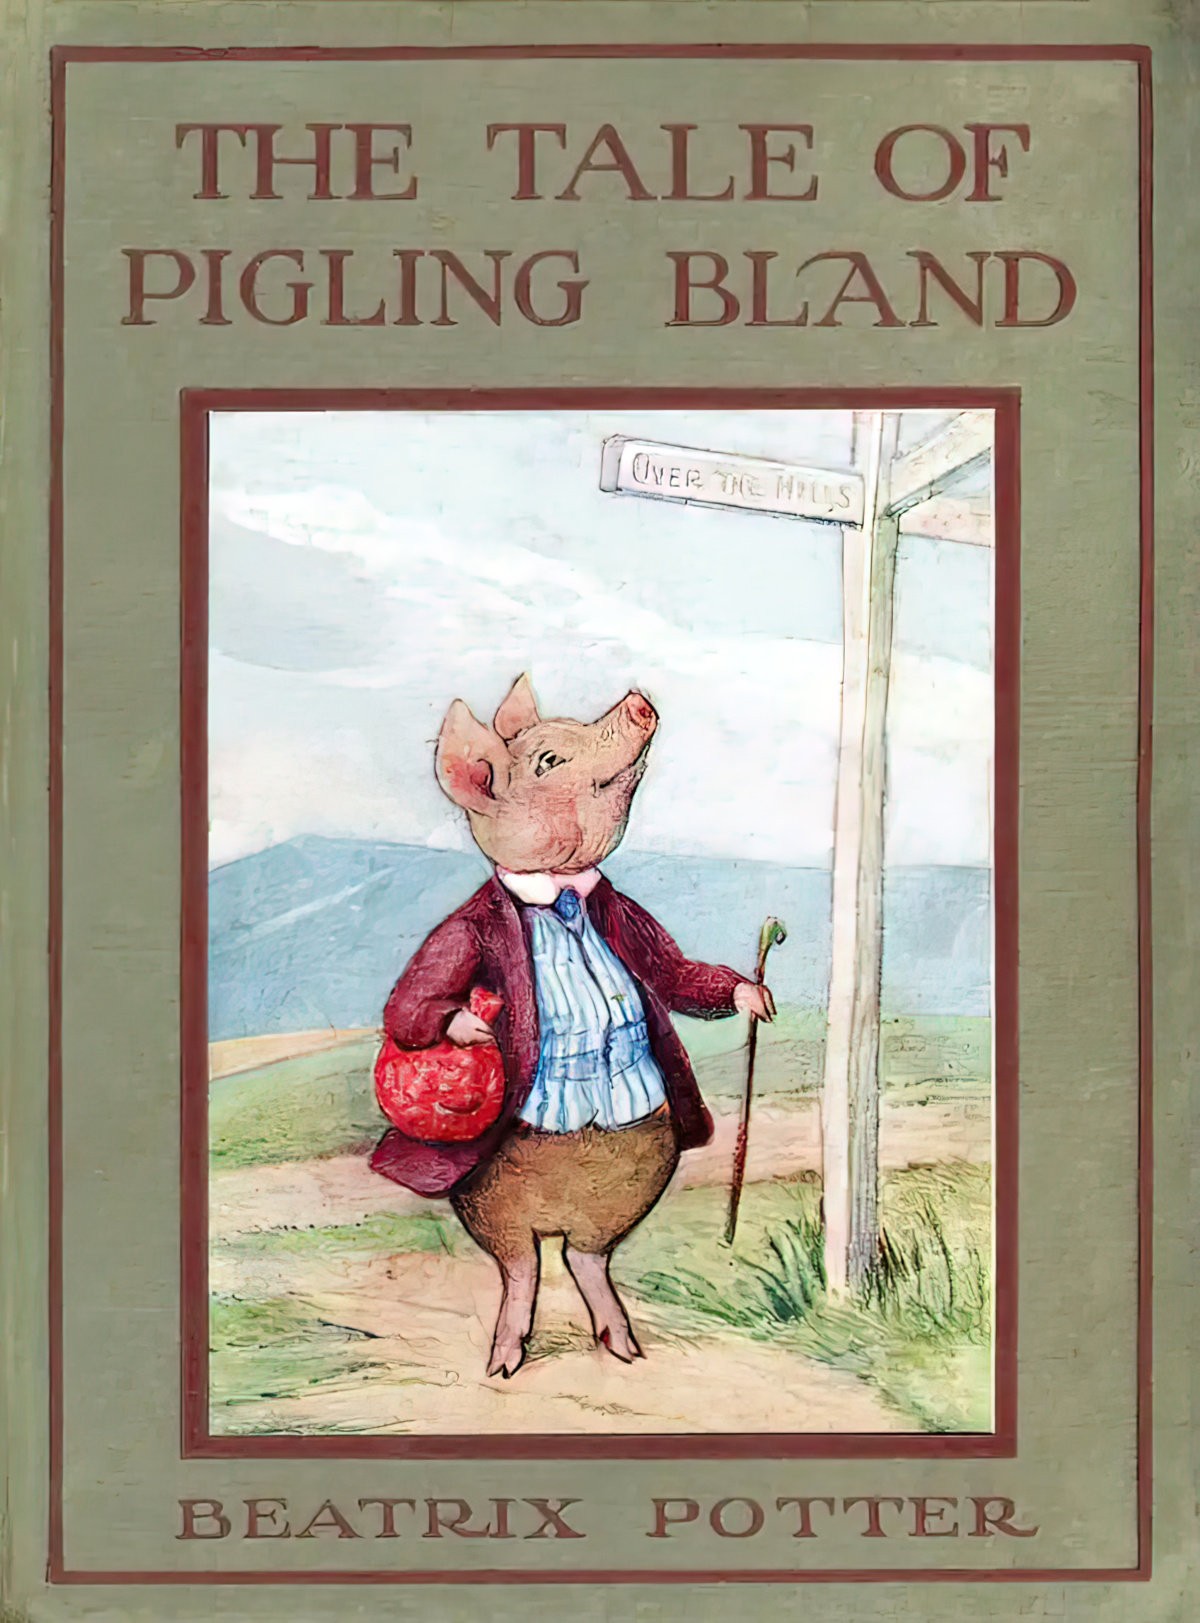 The Tale Of Pigling Bland by Beatrix Potter Analysis